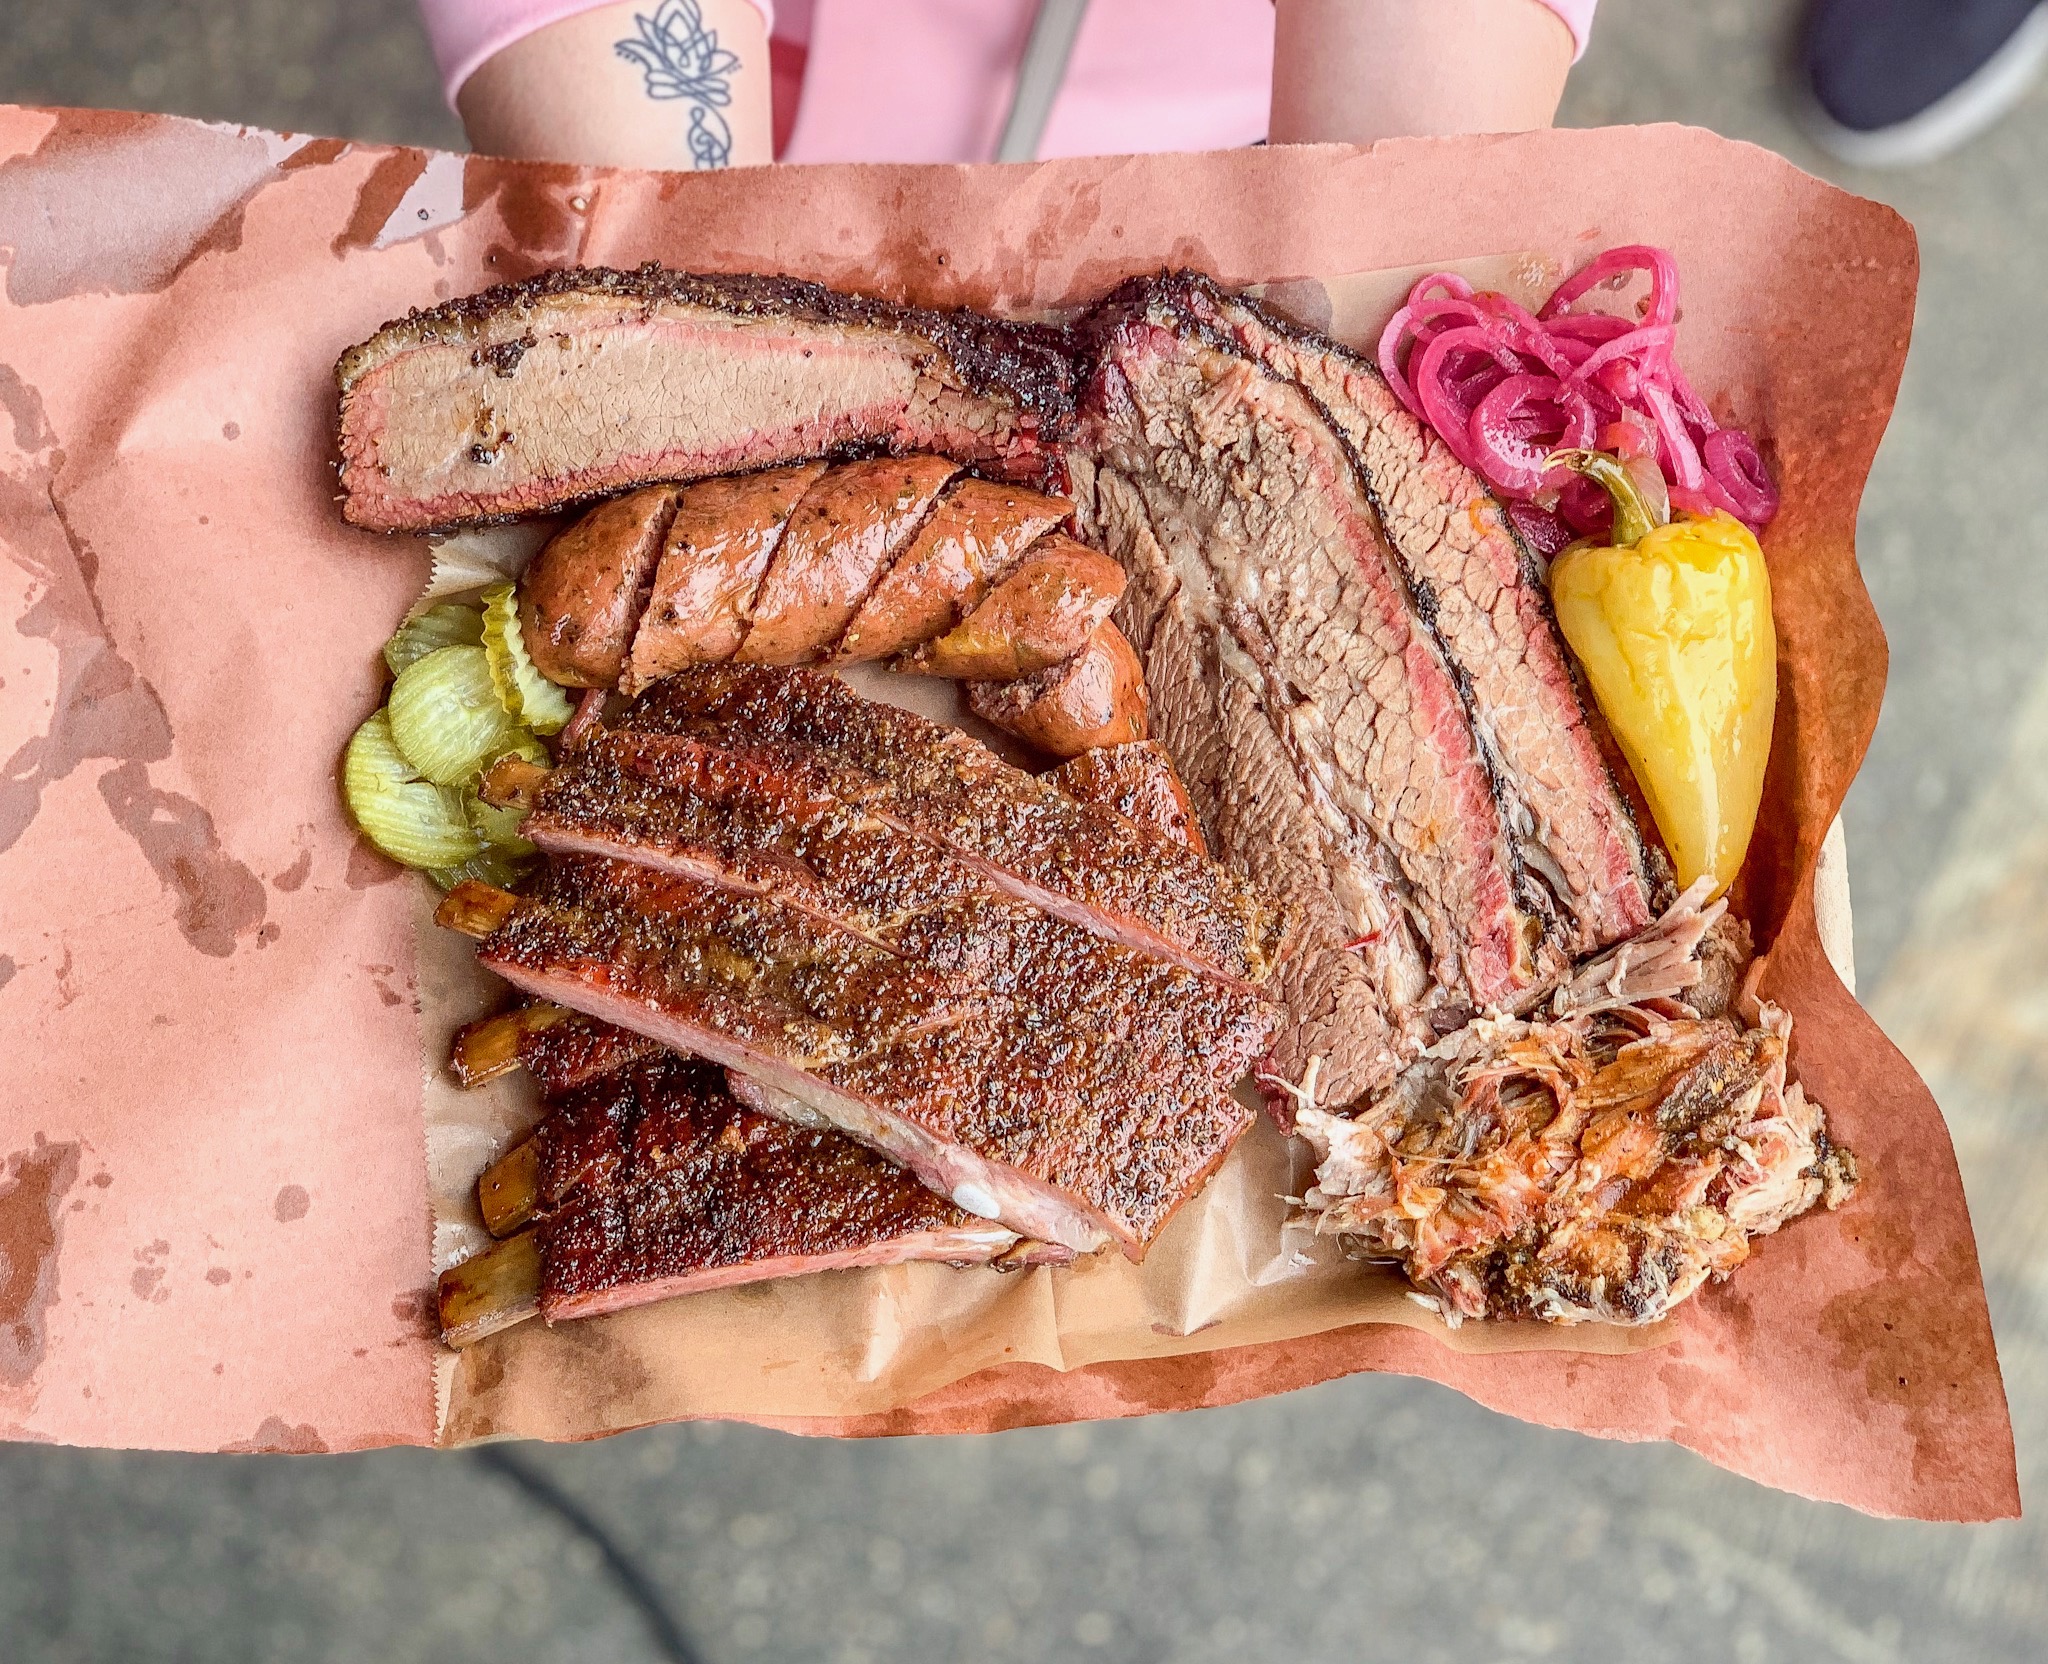 Moo’s craft barbecue sits on a pink paper tray.